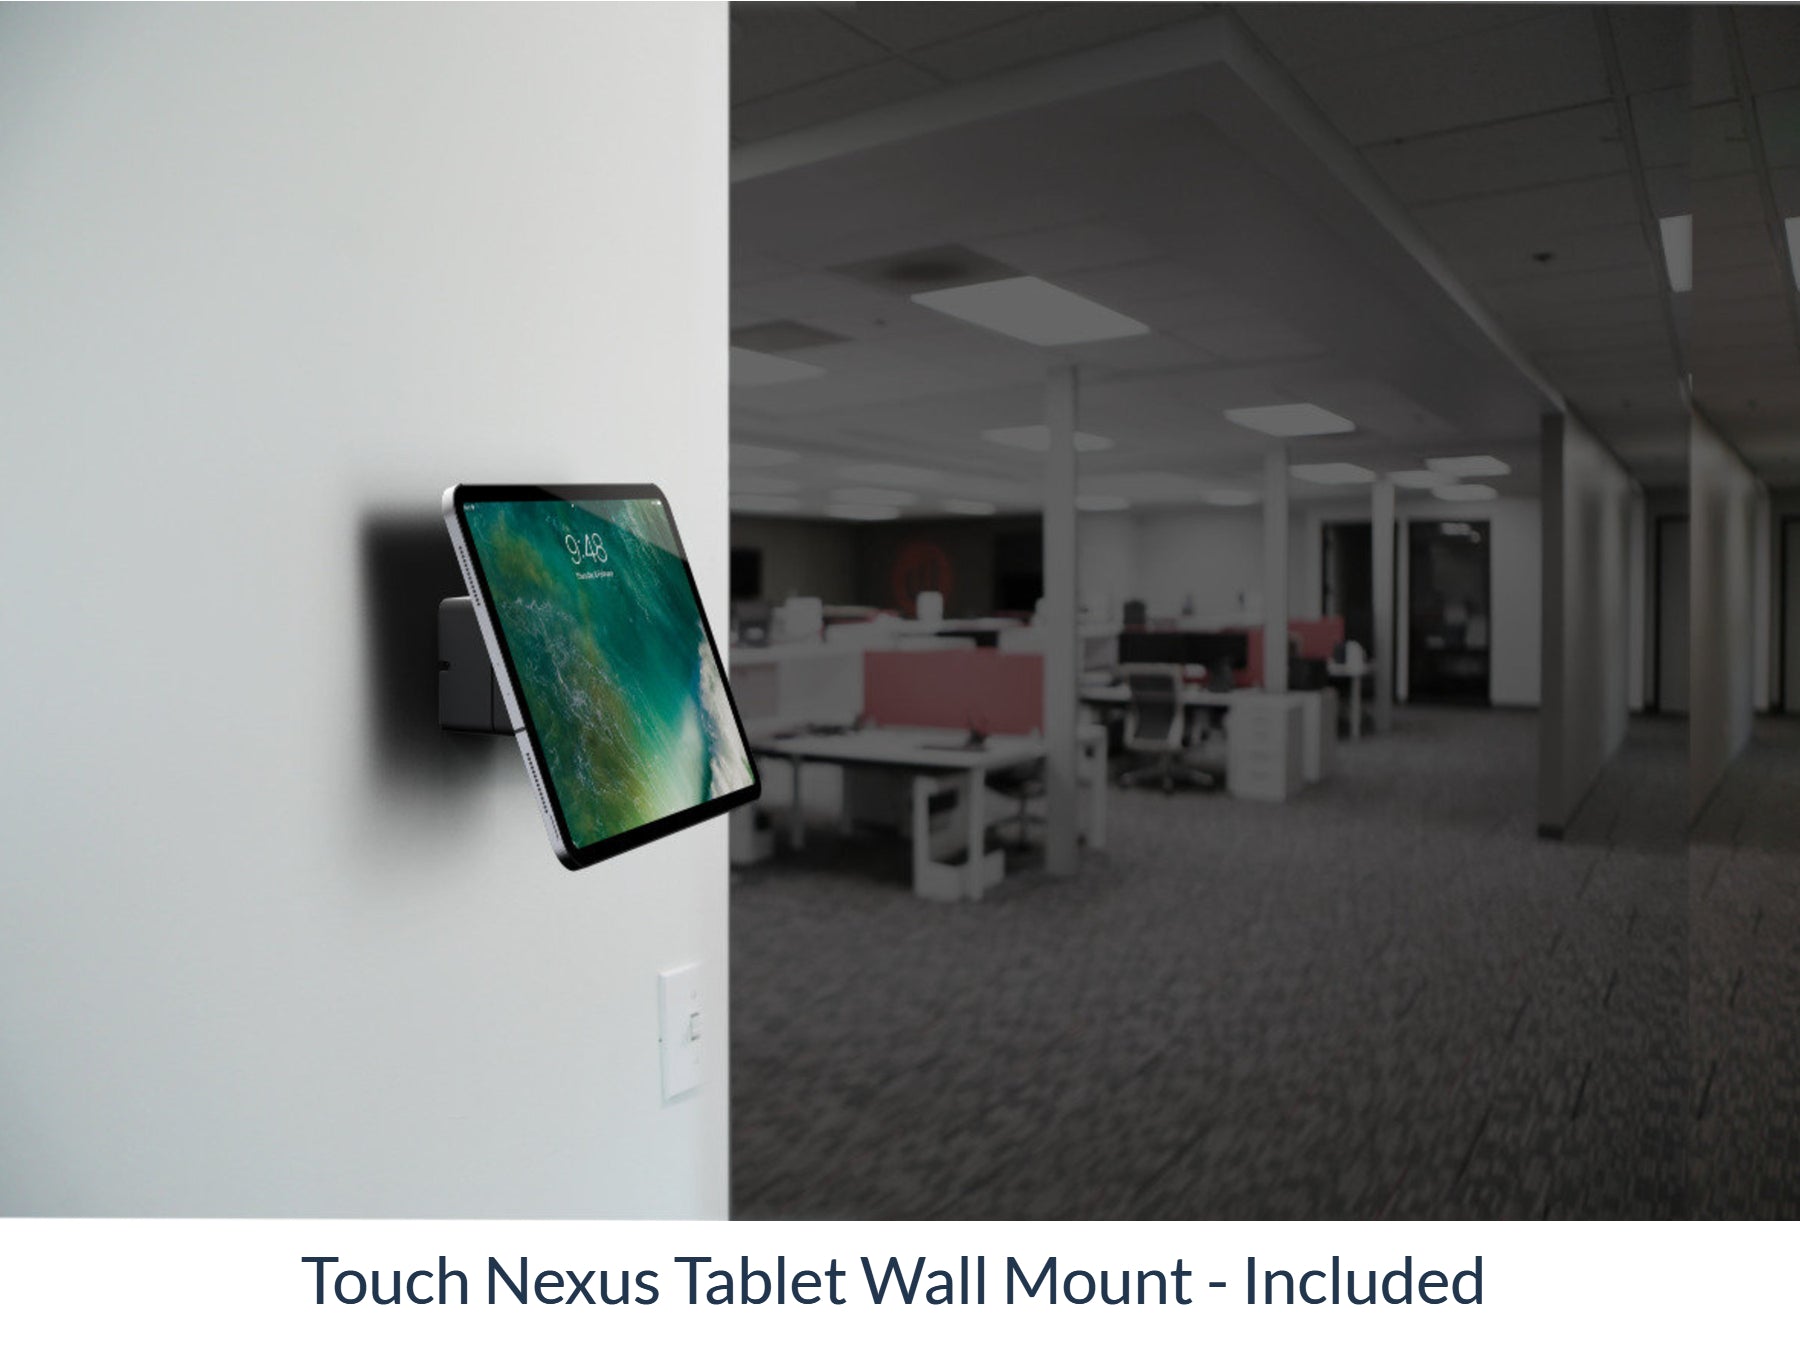 The Touch Nexus Tablet Stand, Wall Mount